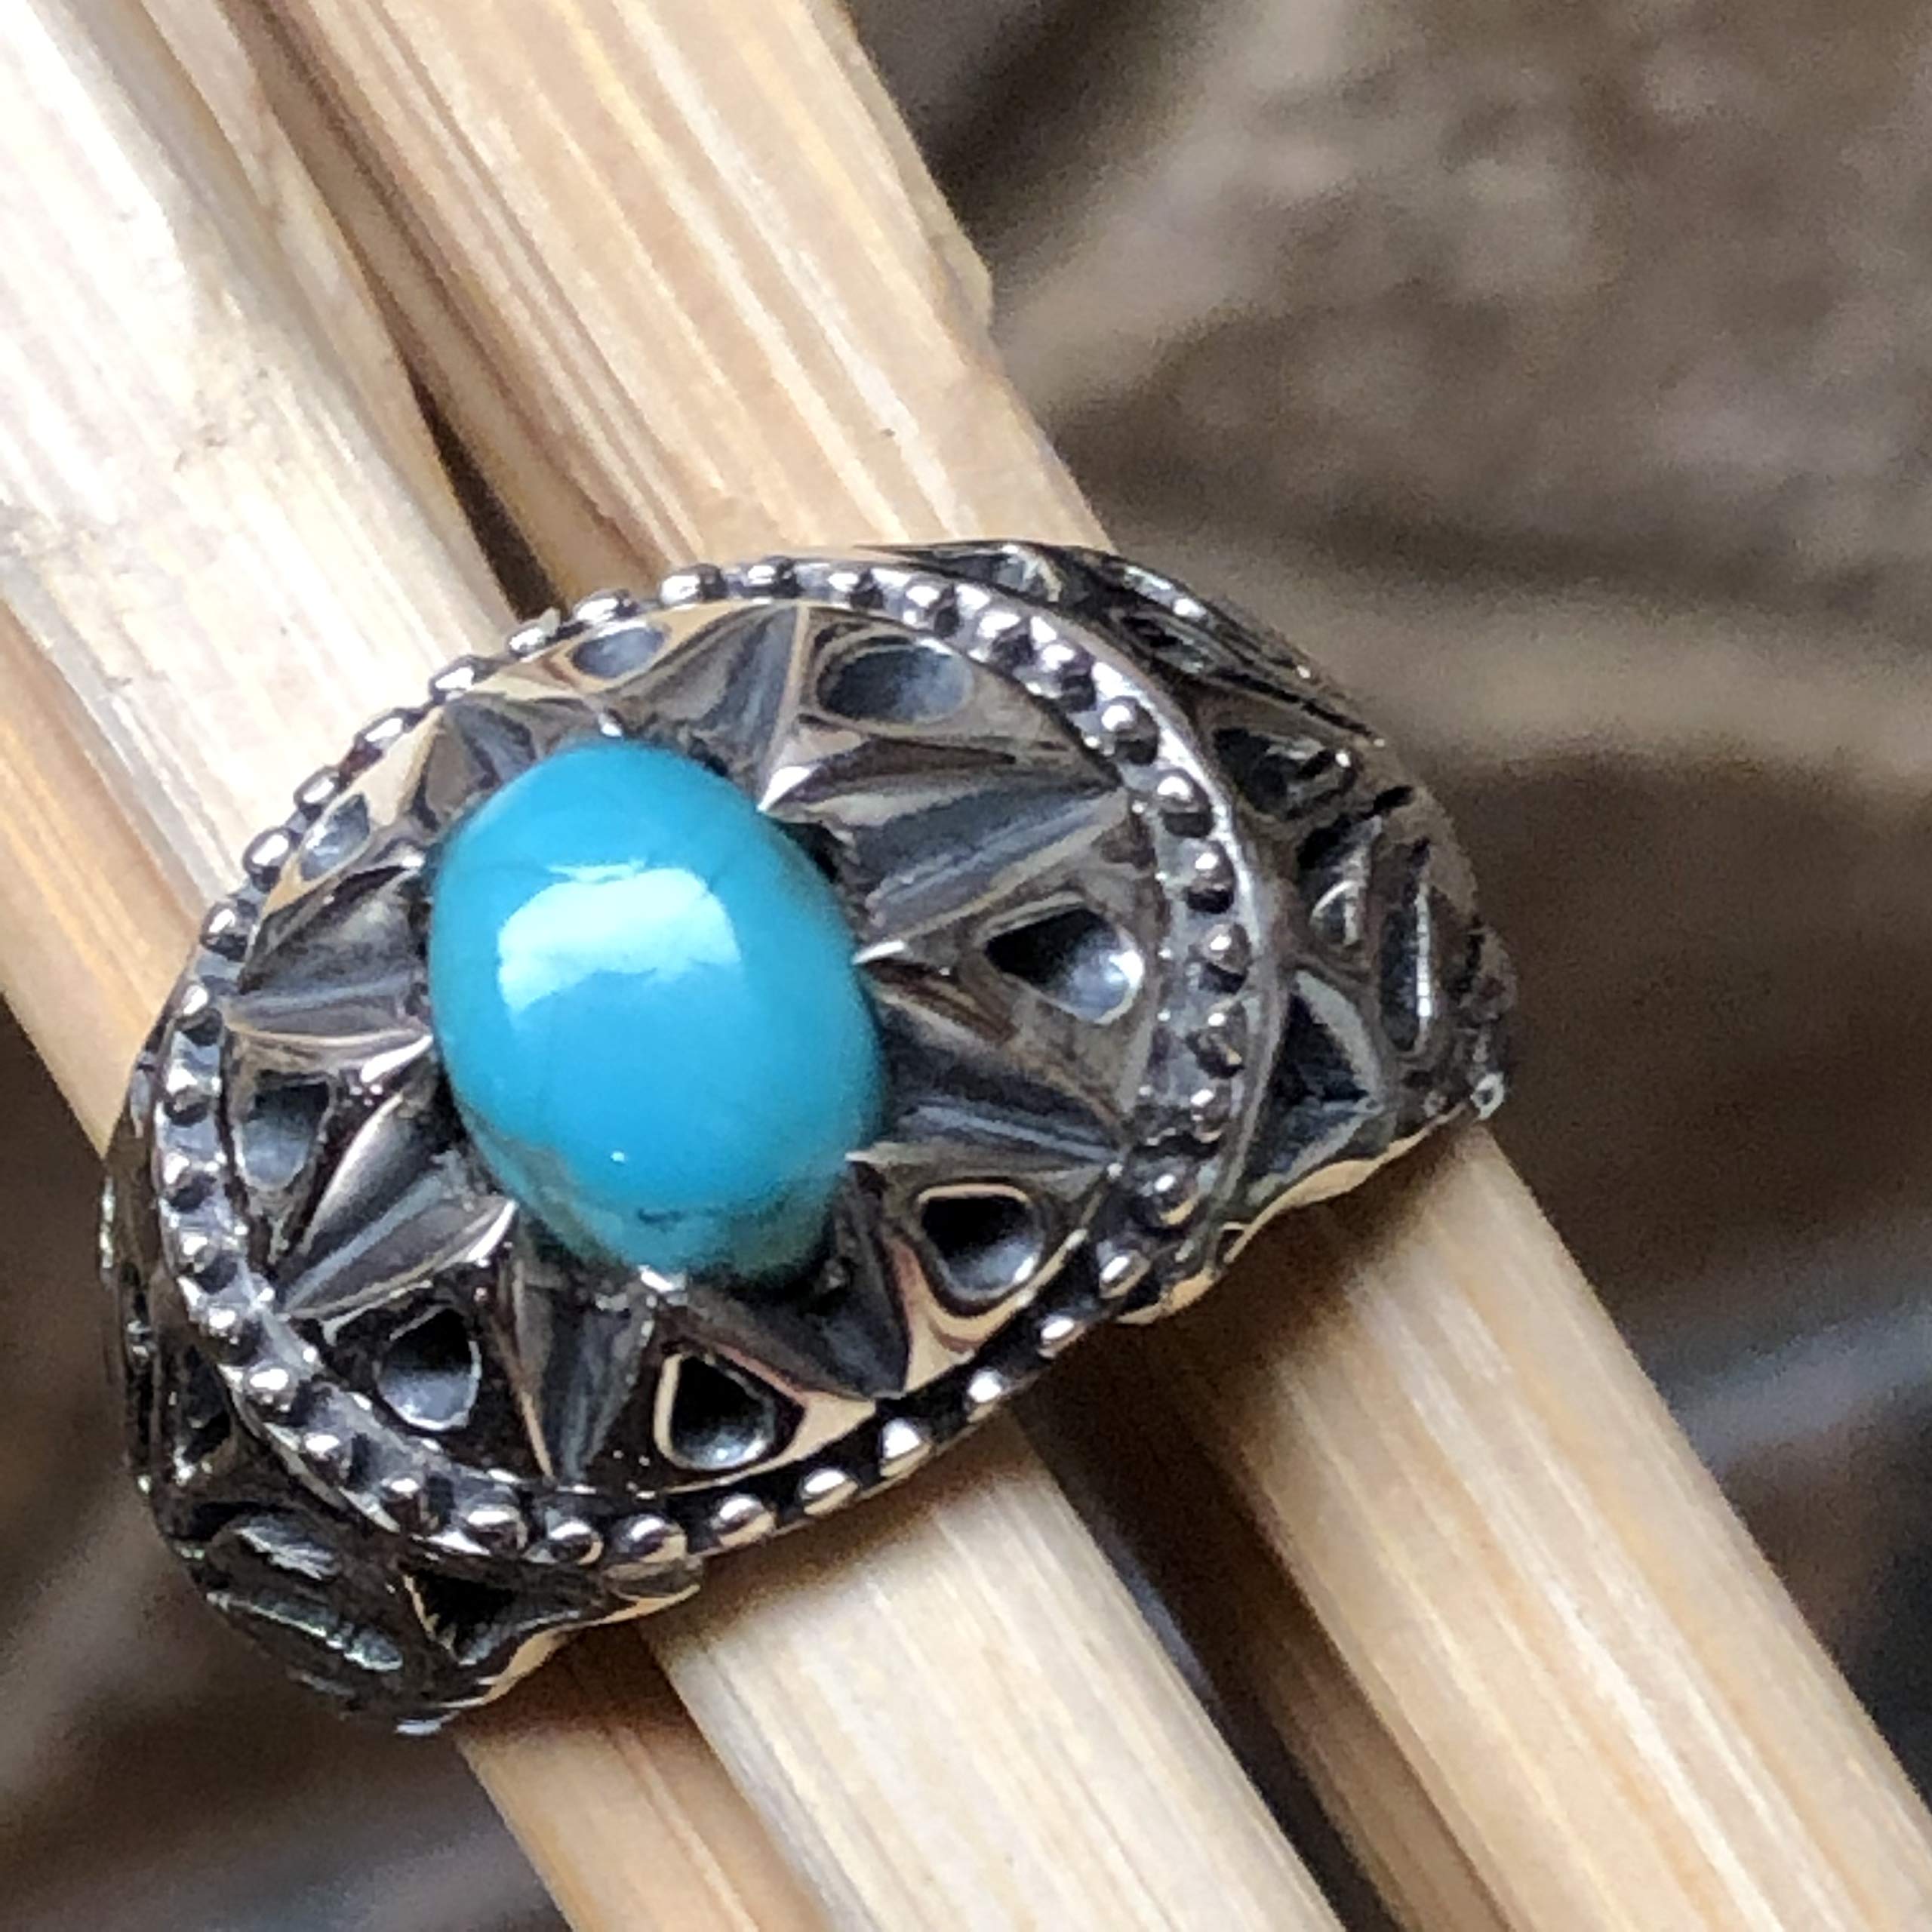 Blue Mohave Turquoise 925 Solid Sterling Silver Men's Ring Size 8, 9, 10, 11, 12 - Natural Rocks by Kala